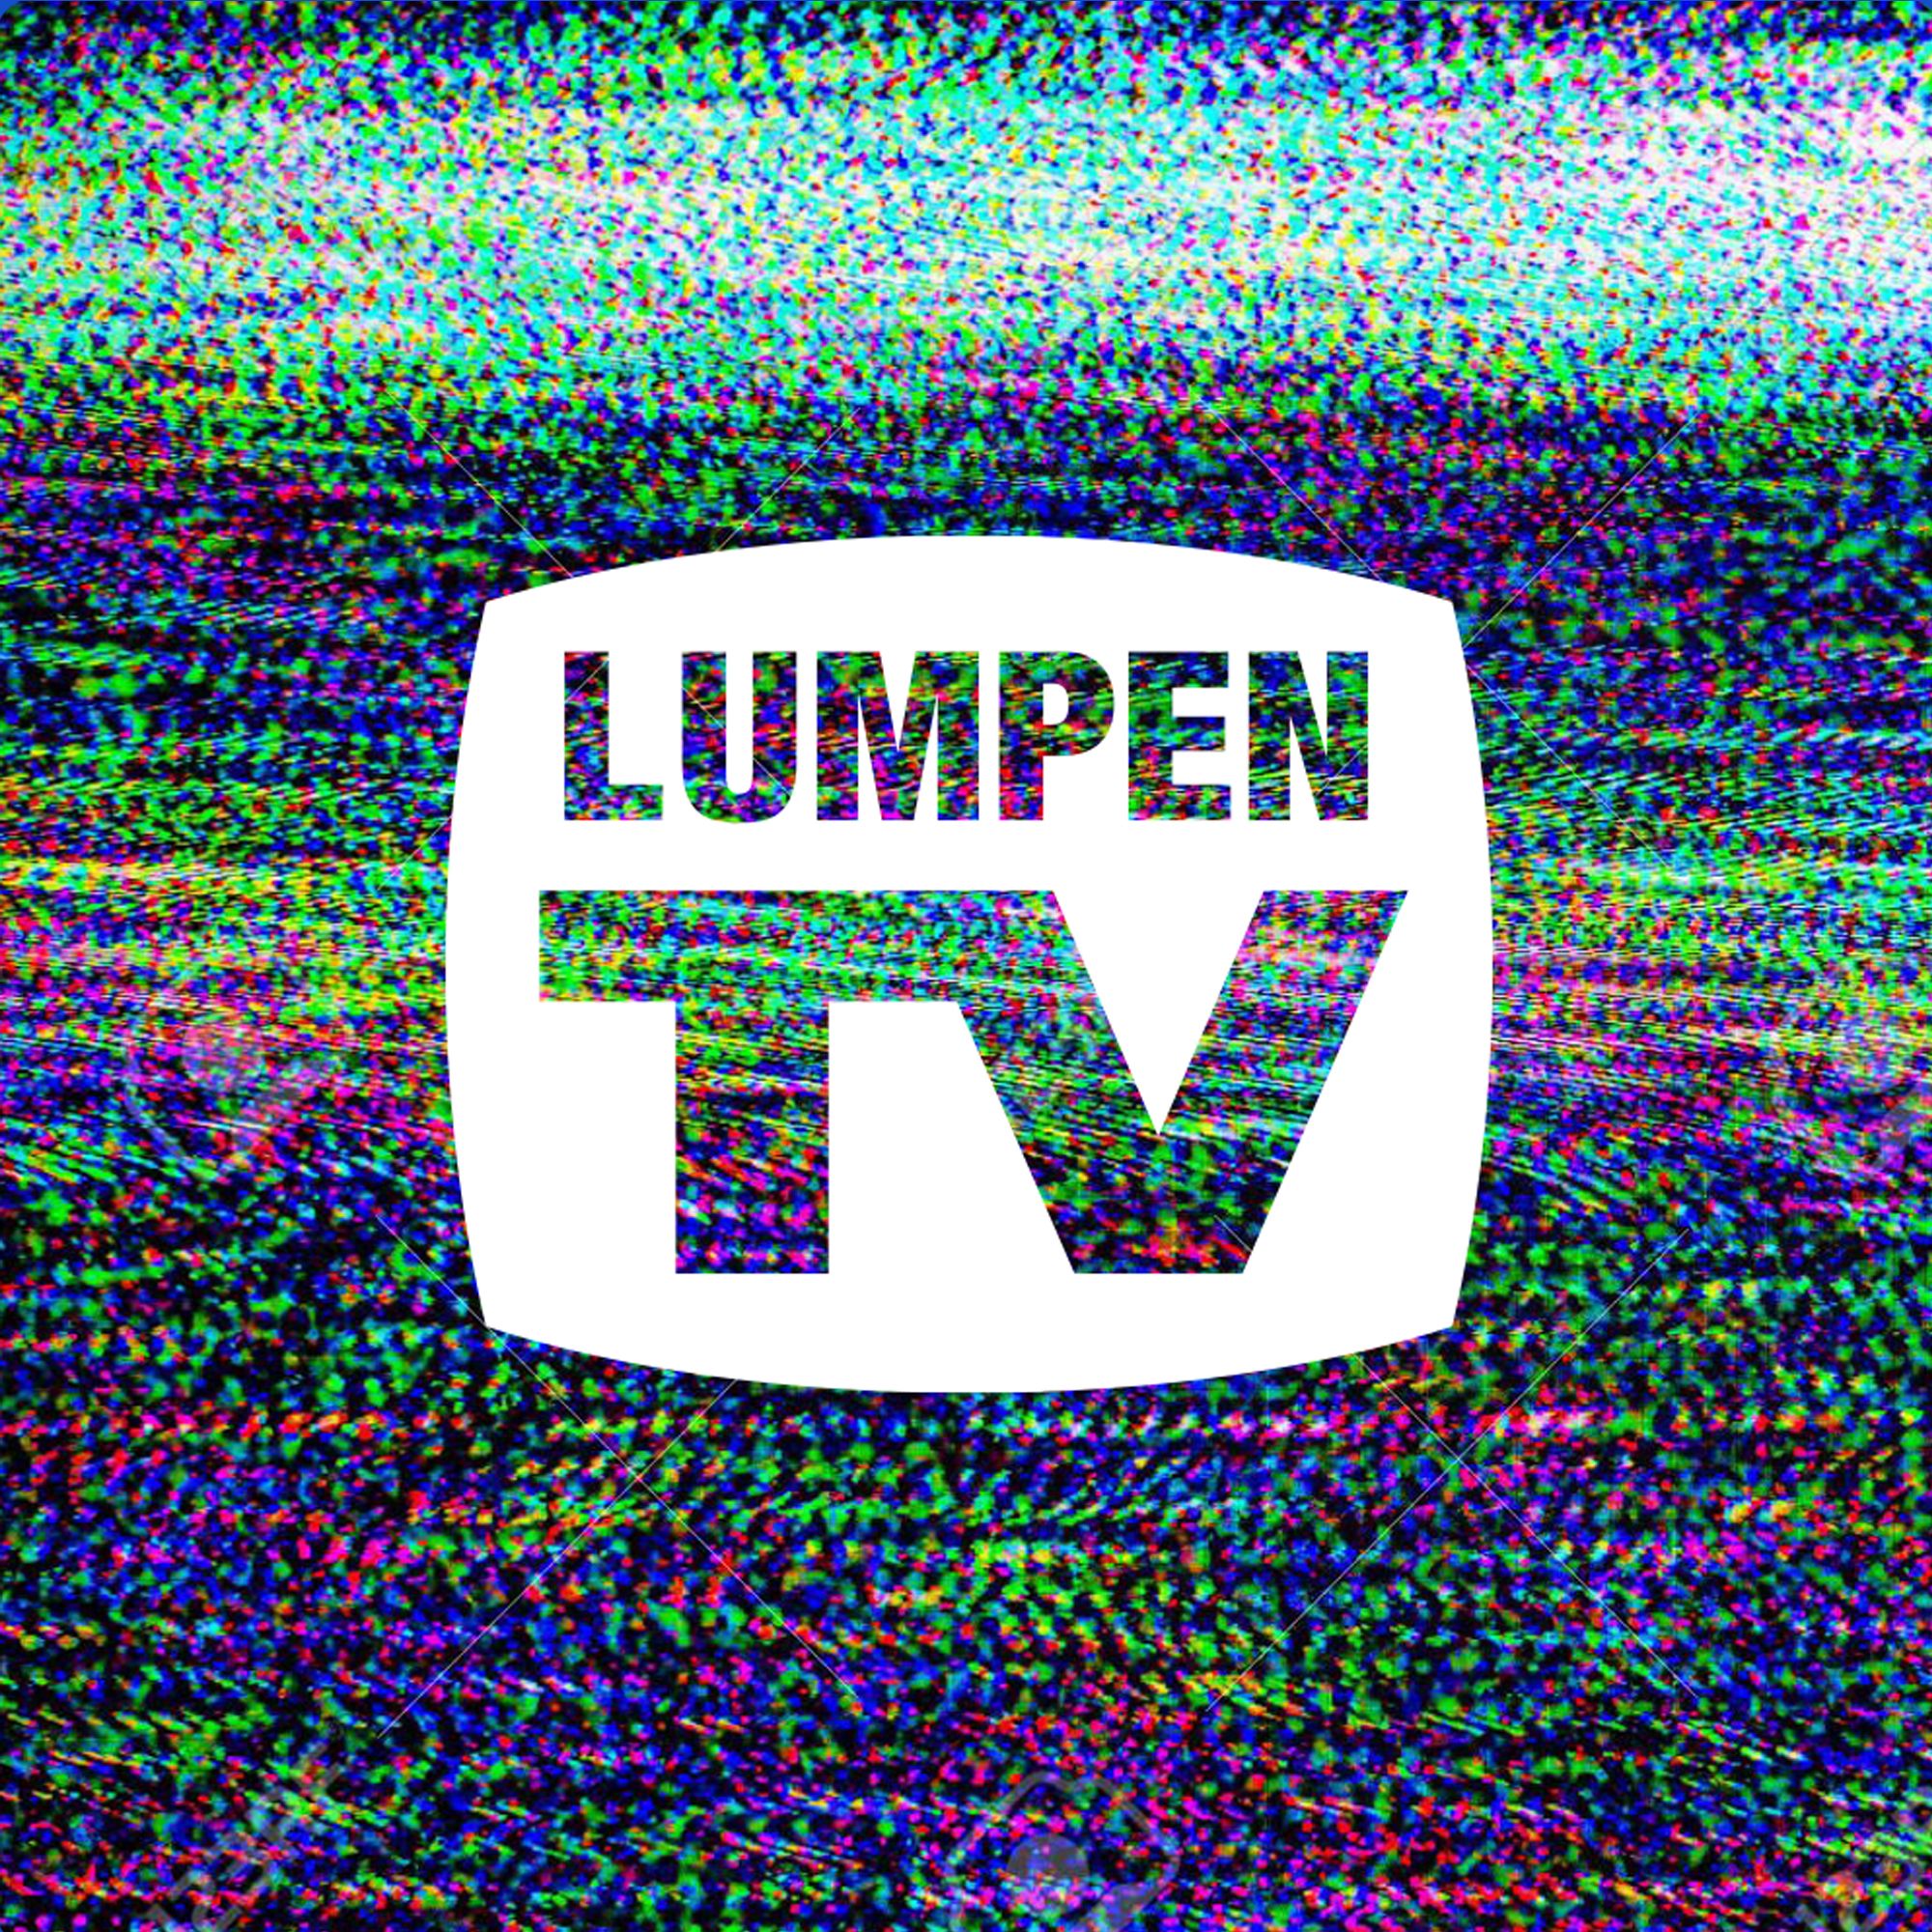 Broadcast never had it so fast. Lumpen TV is our latest media endeavor that partners with our cultural ecology of art activism and performance.